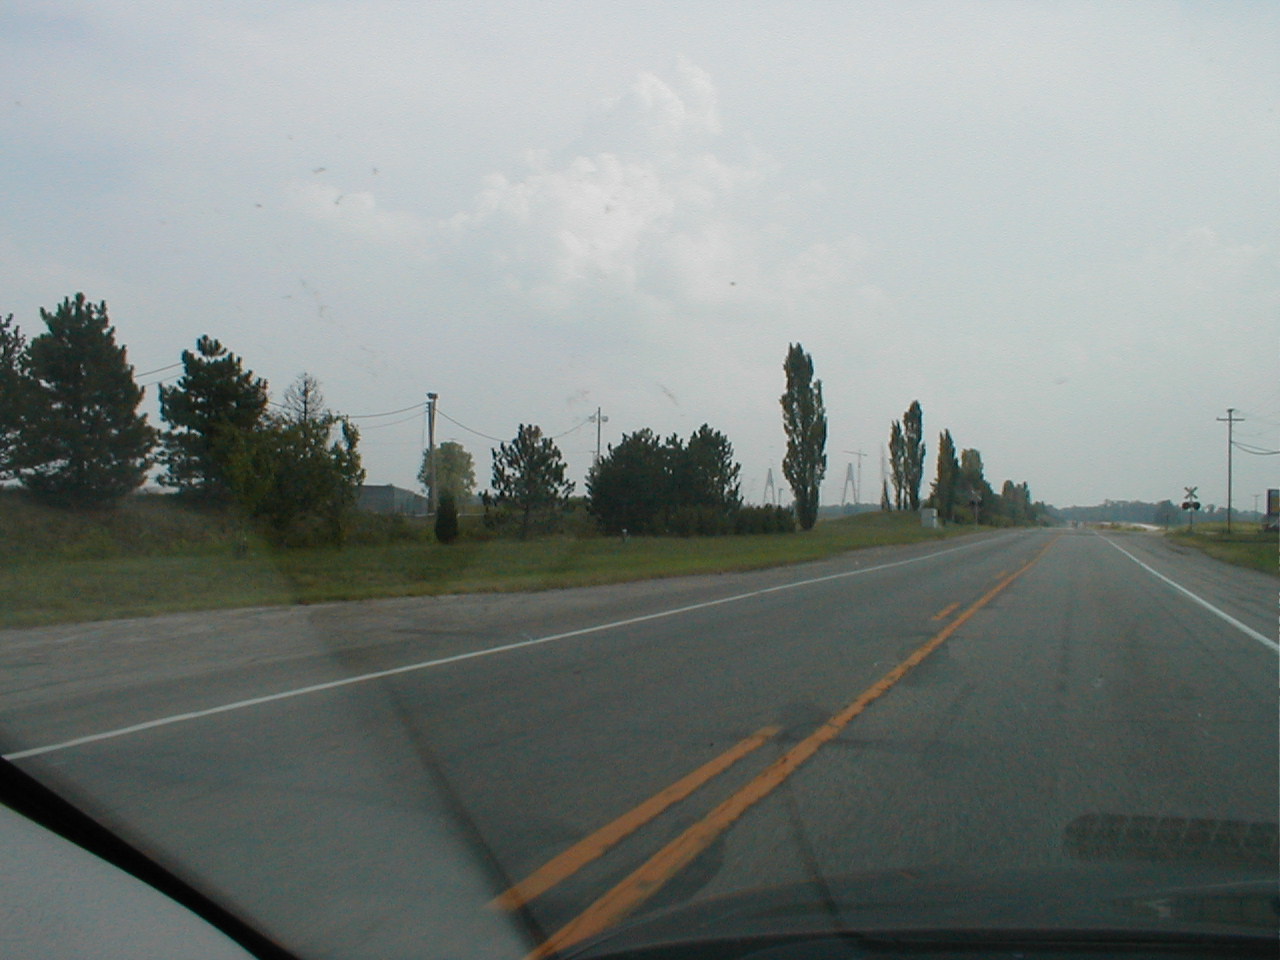 Facing south on US 231 towards the bridge. The bridge towers are visible between the trees.